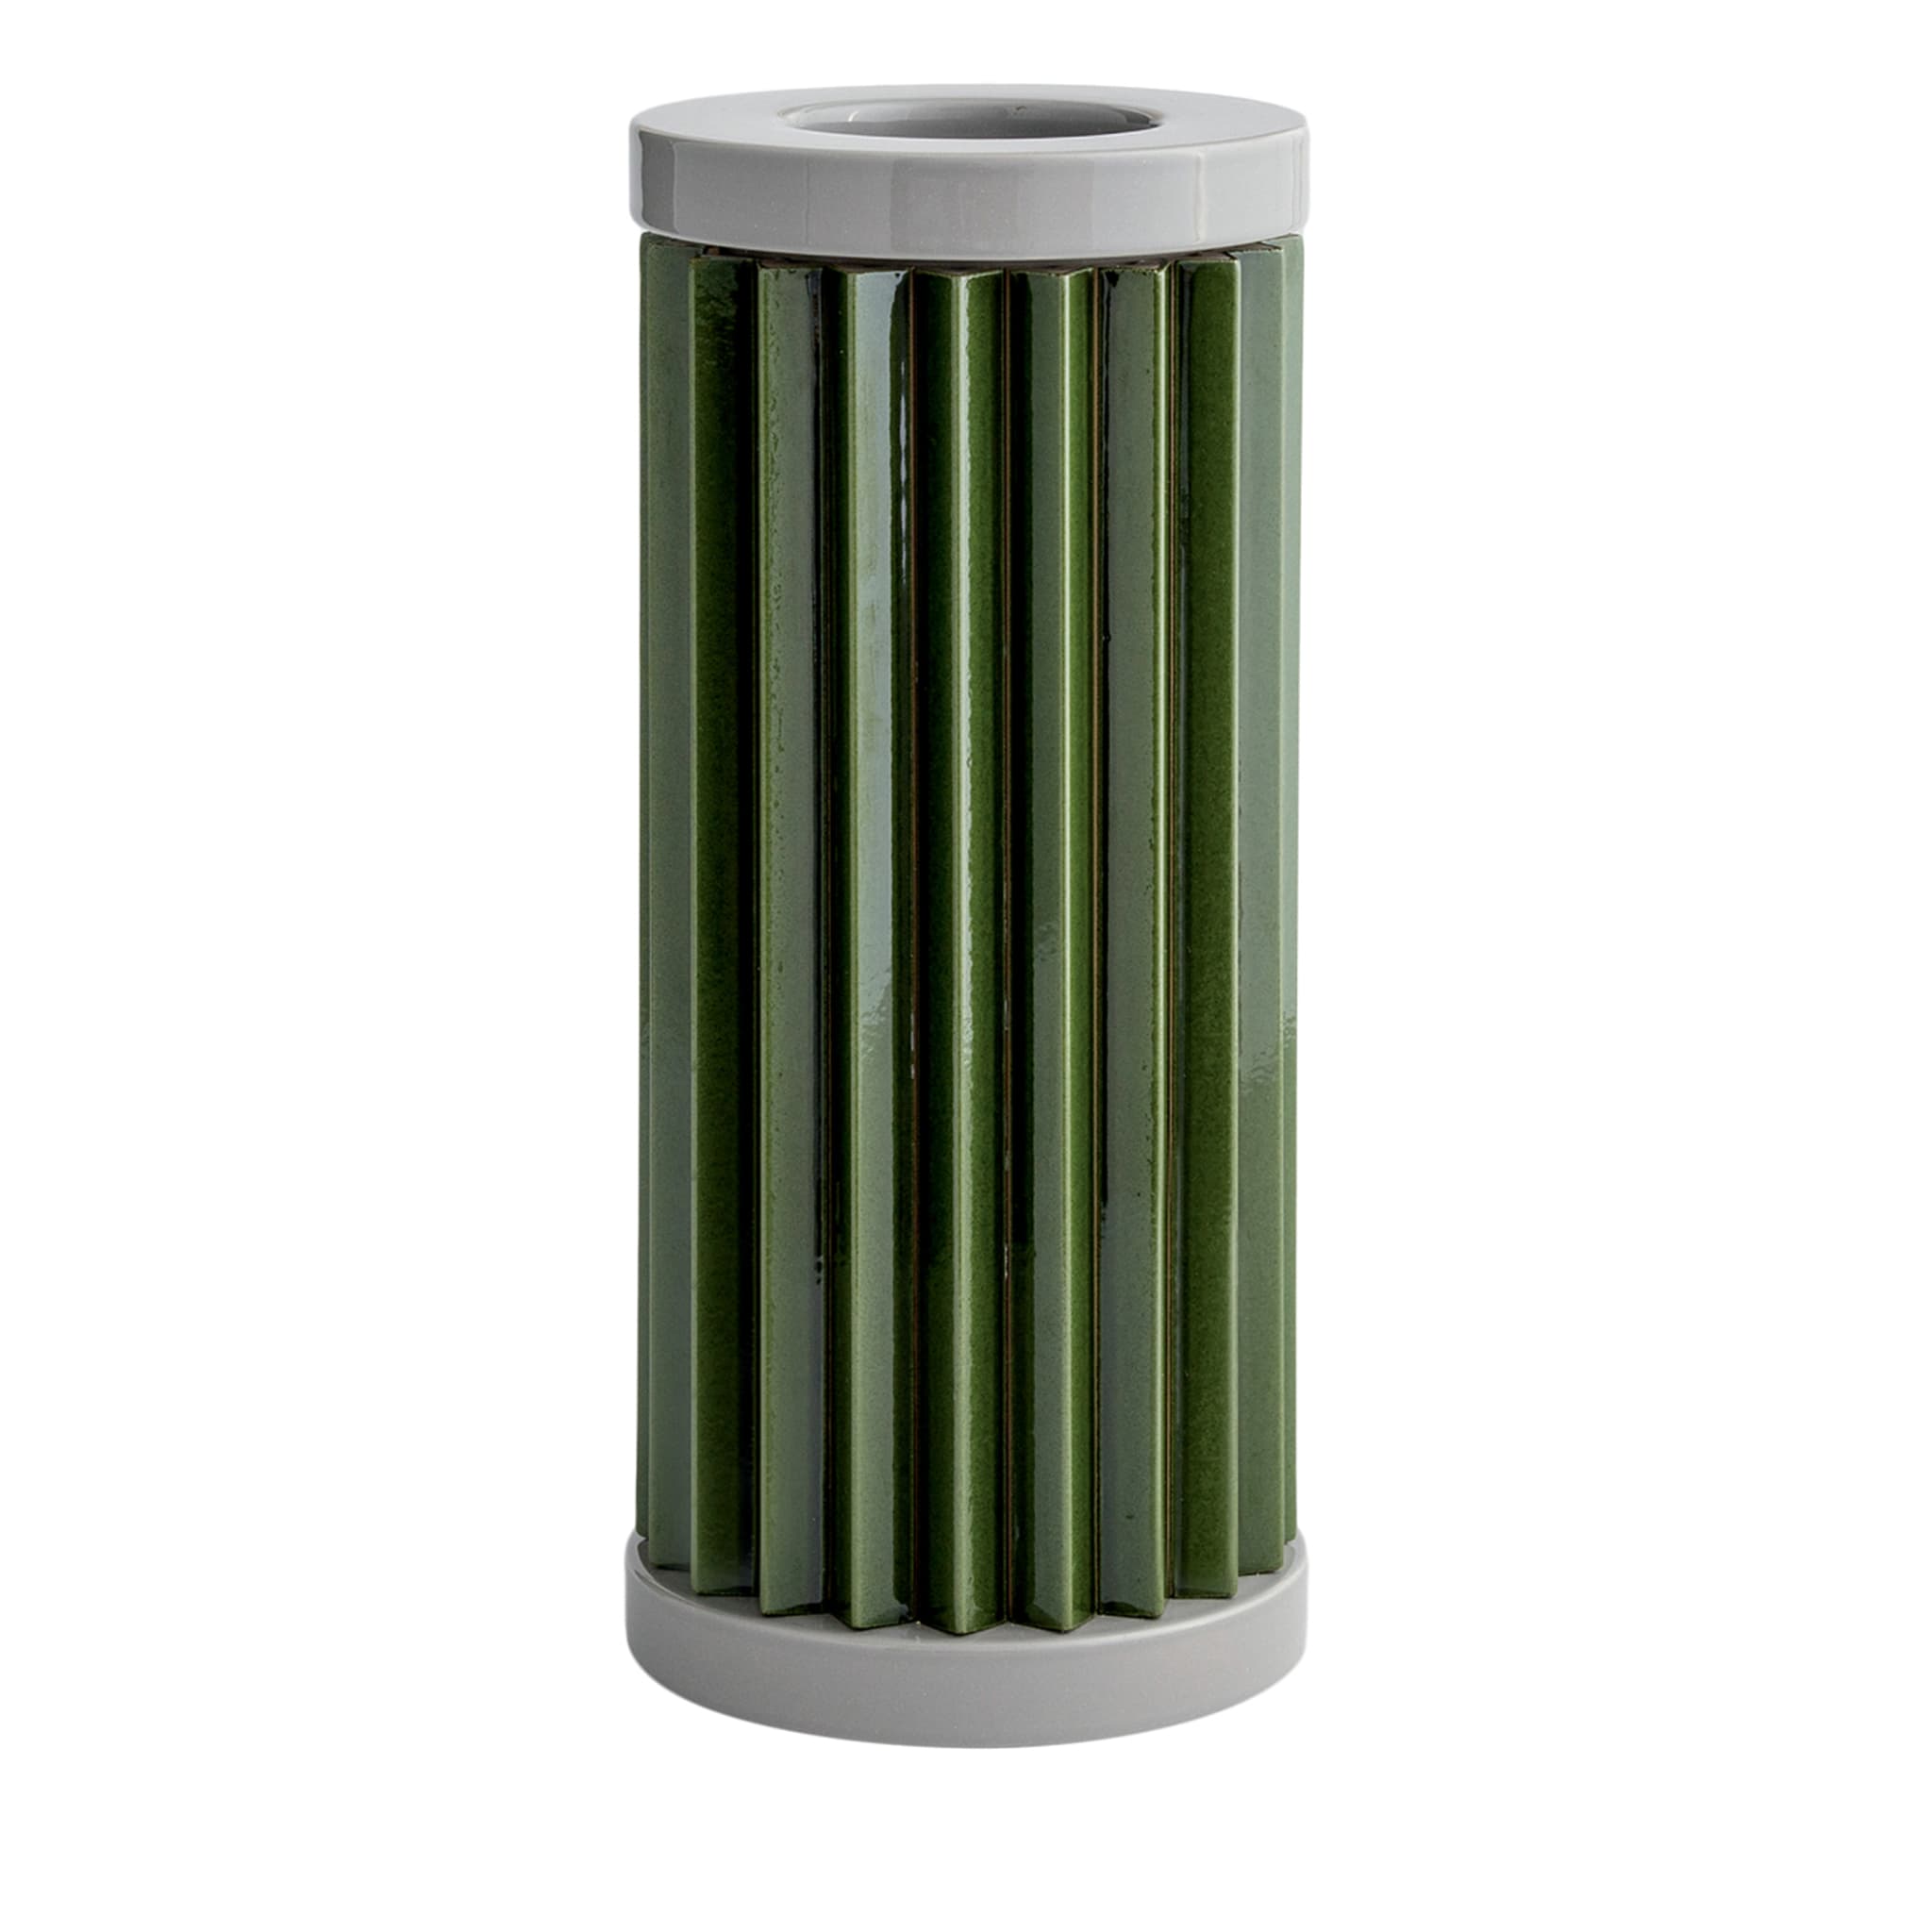 Rombini A Green and Gray Vase by Ronan & Erwan Bouroullec - Main view